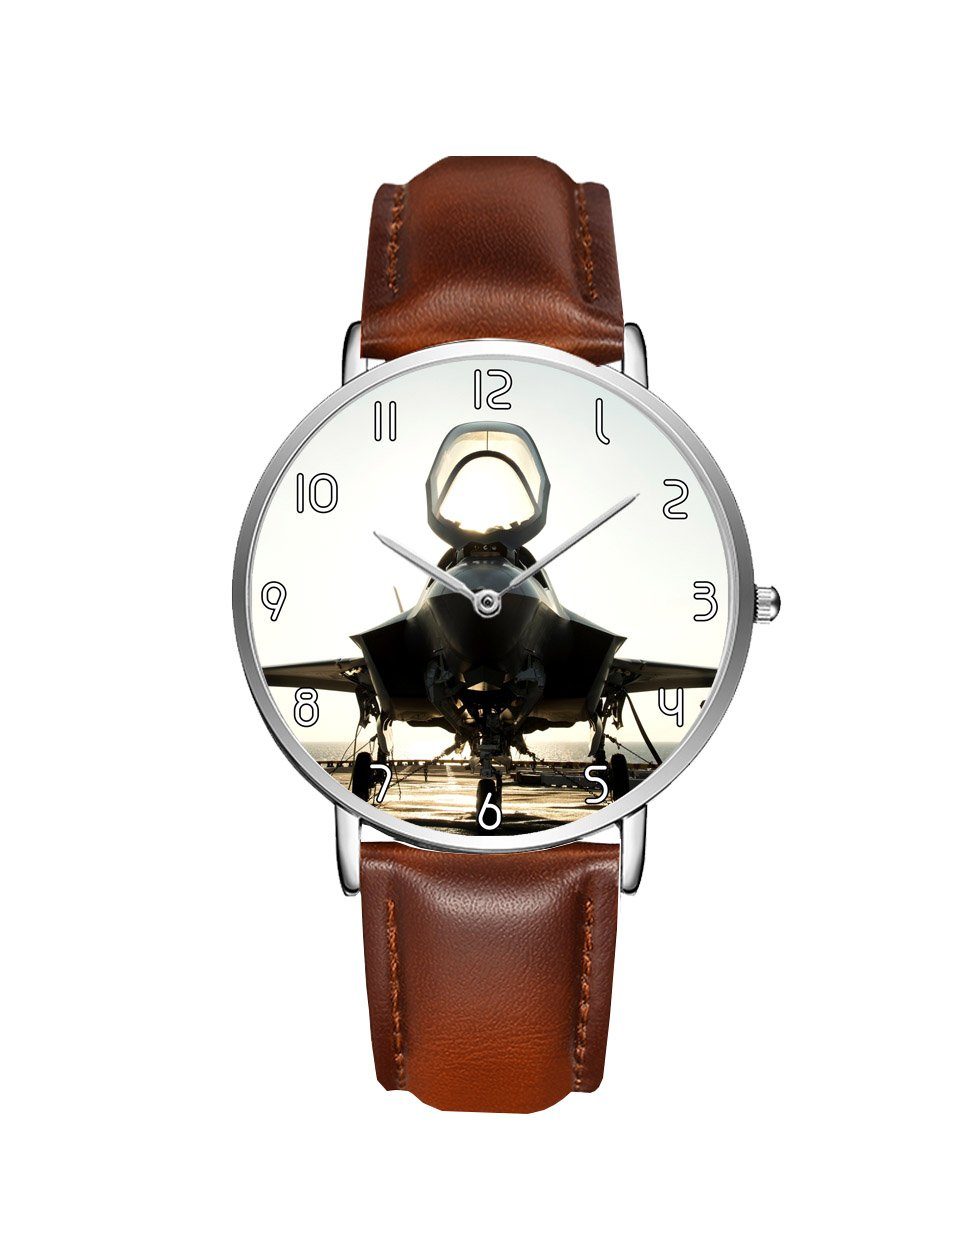 Fighting Falcon F35 Printed Leather Strap Watches Aviation Shop Silver & Brown Leather Strap 